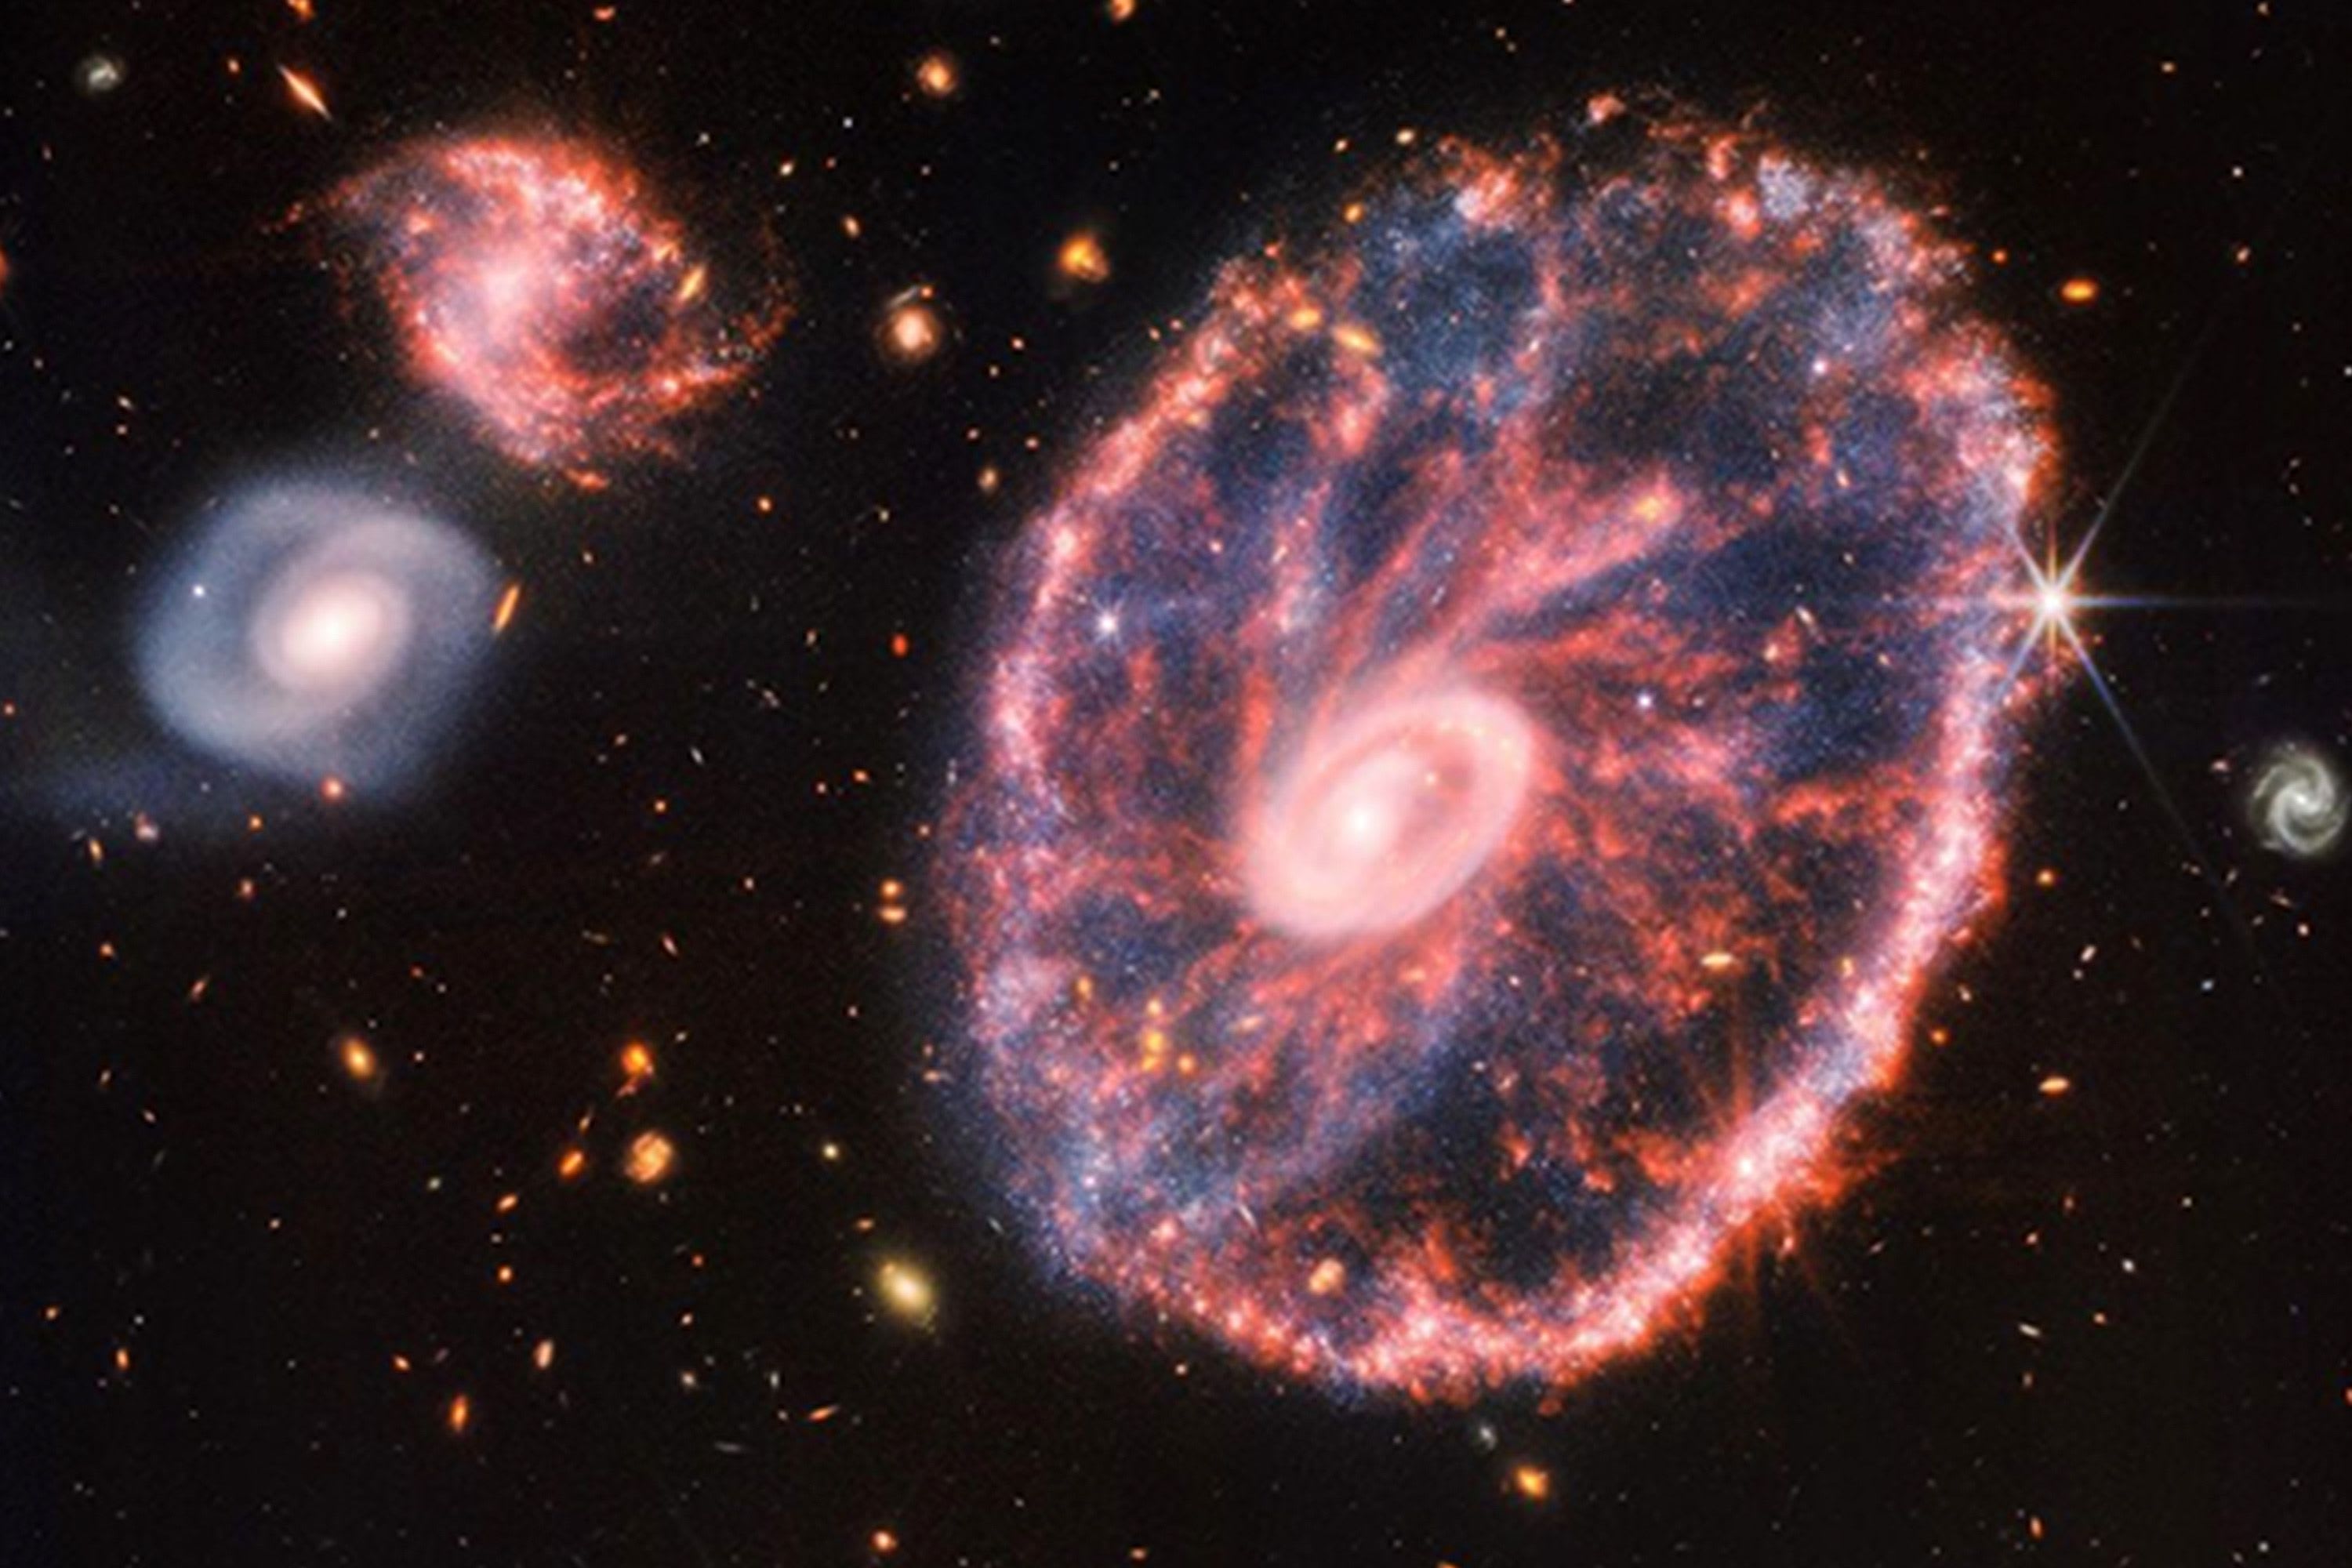 New images capture what happens when galaxies collide